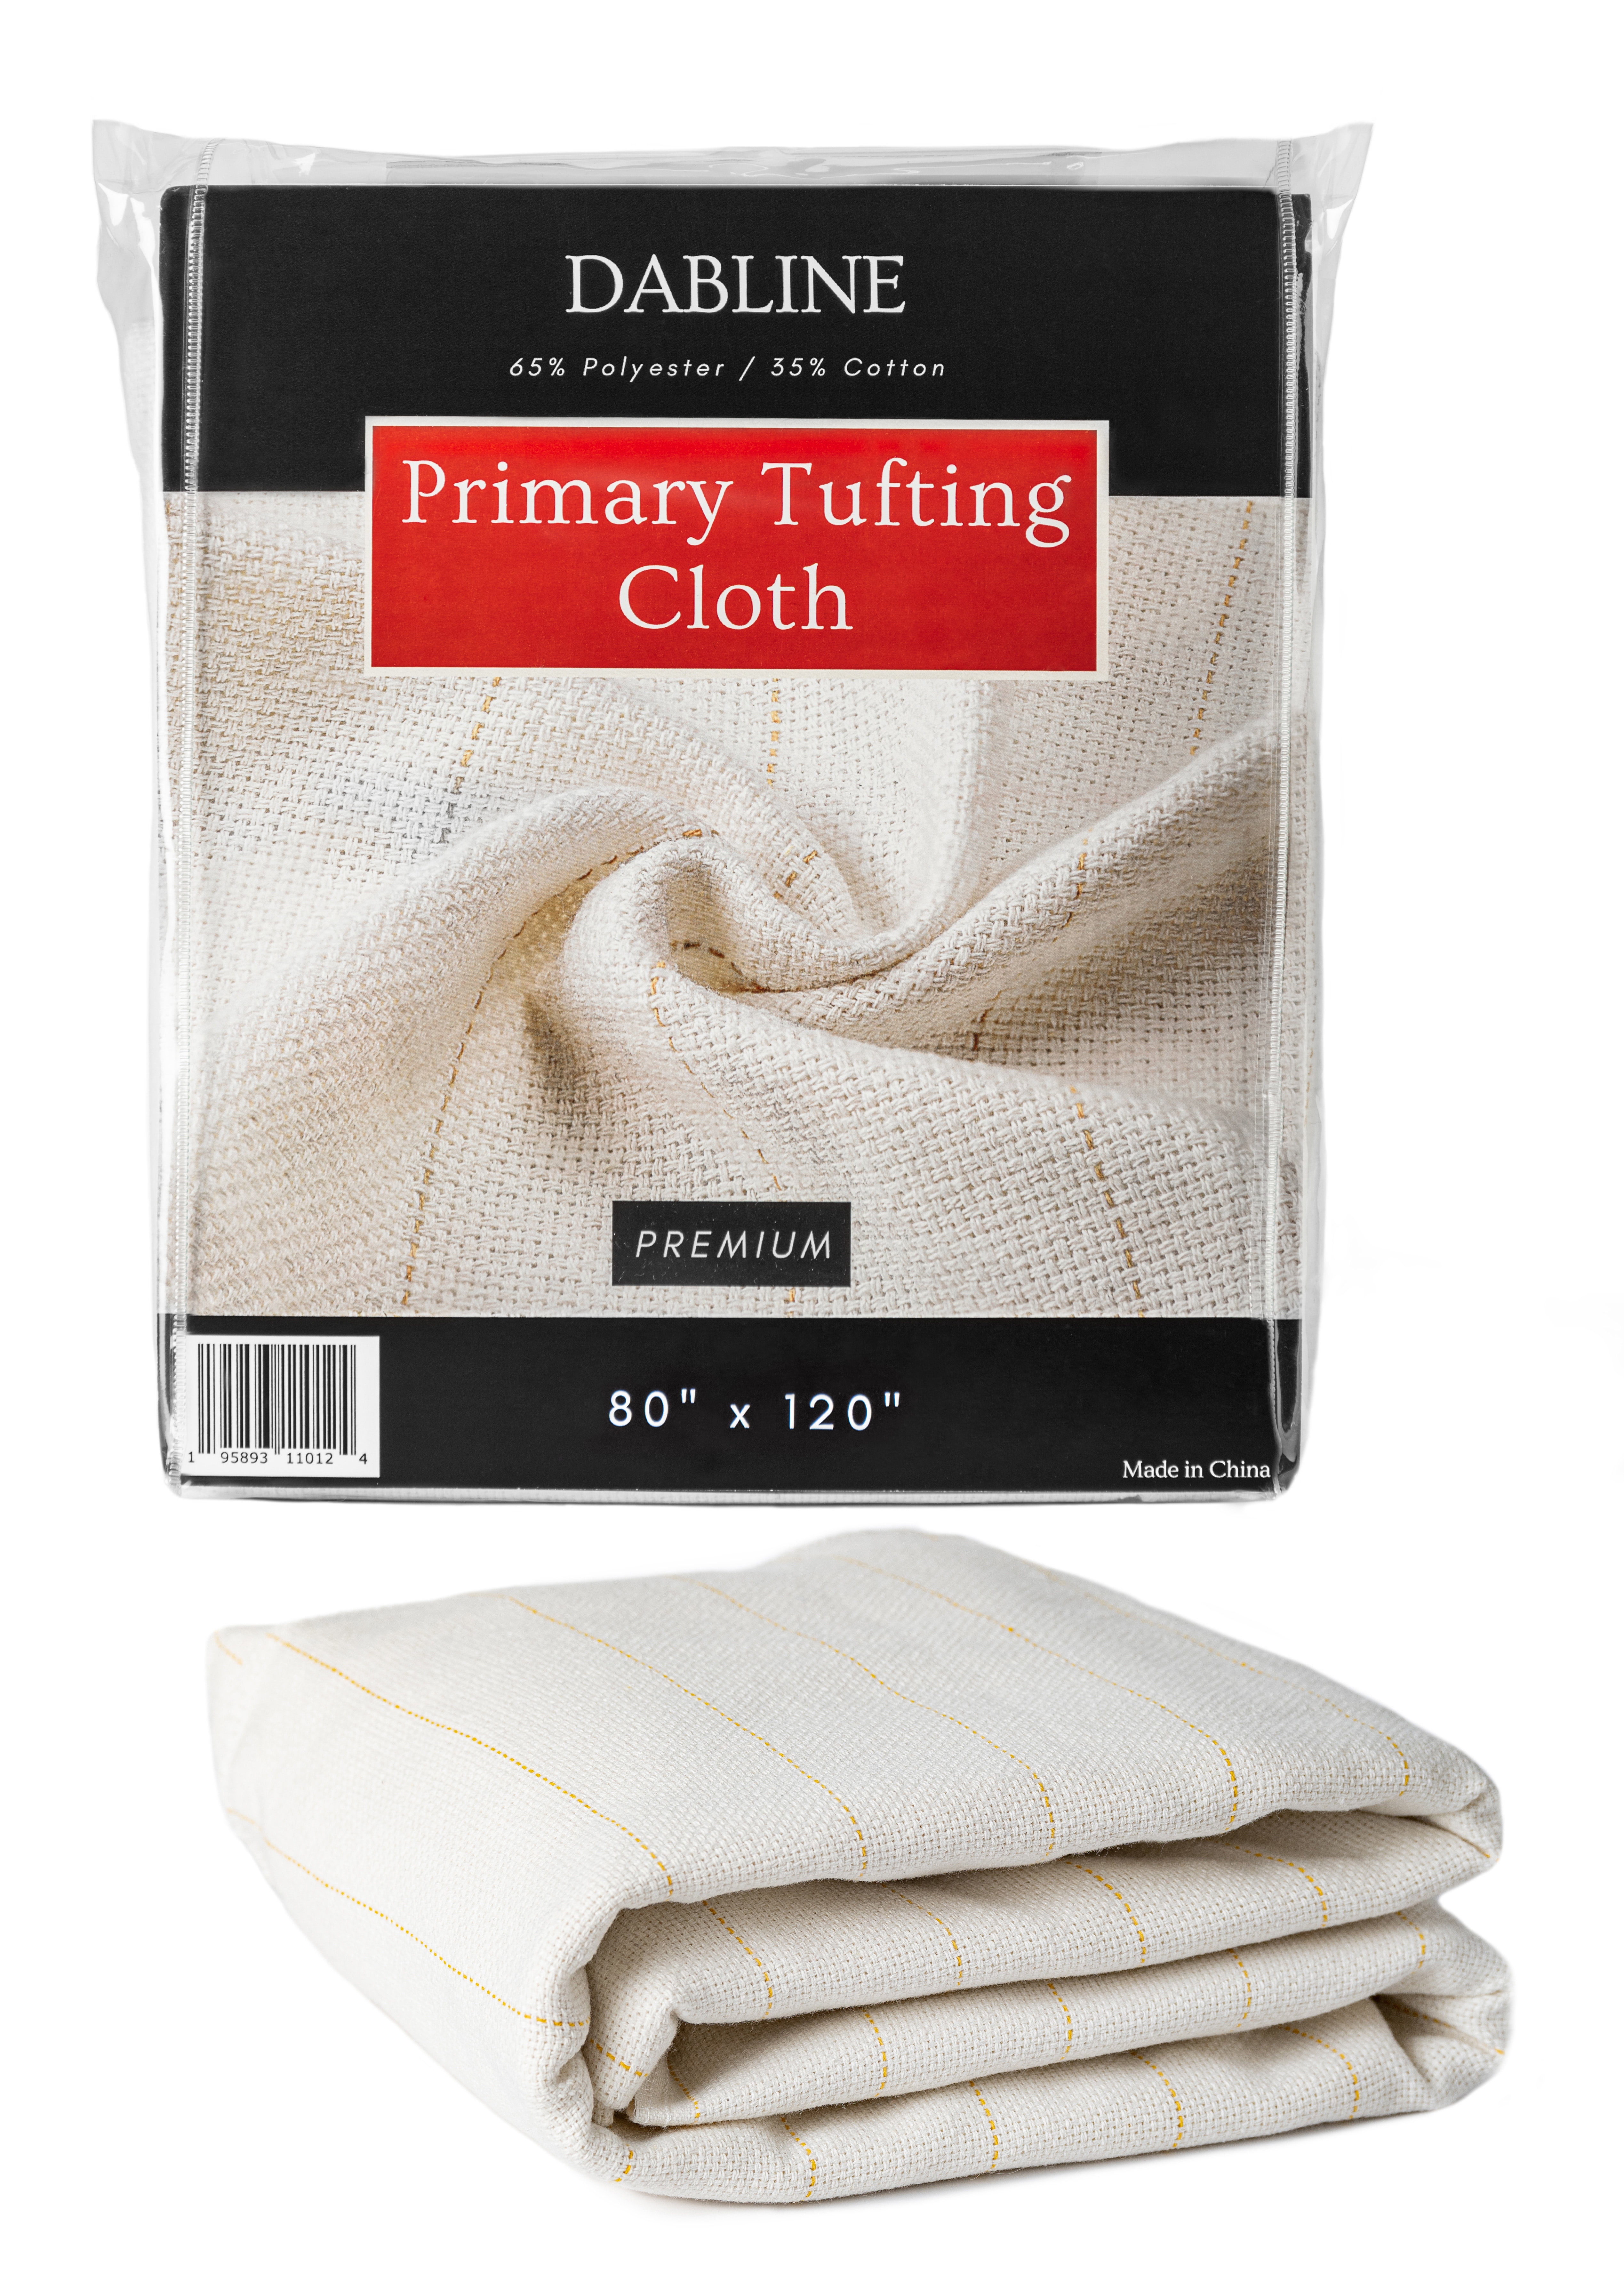 Primary Tufting Cloth - Ideal For Hand-Tufted Rugs And Hobbyist